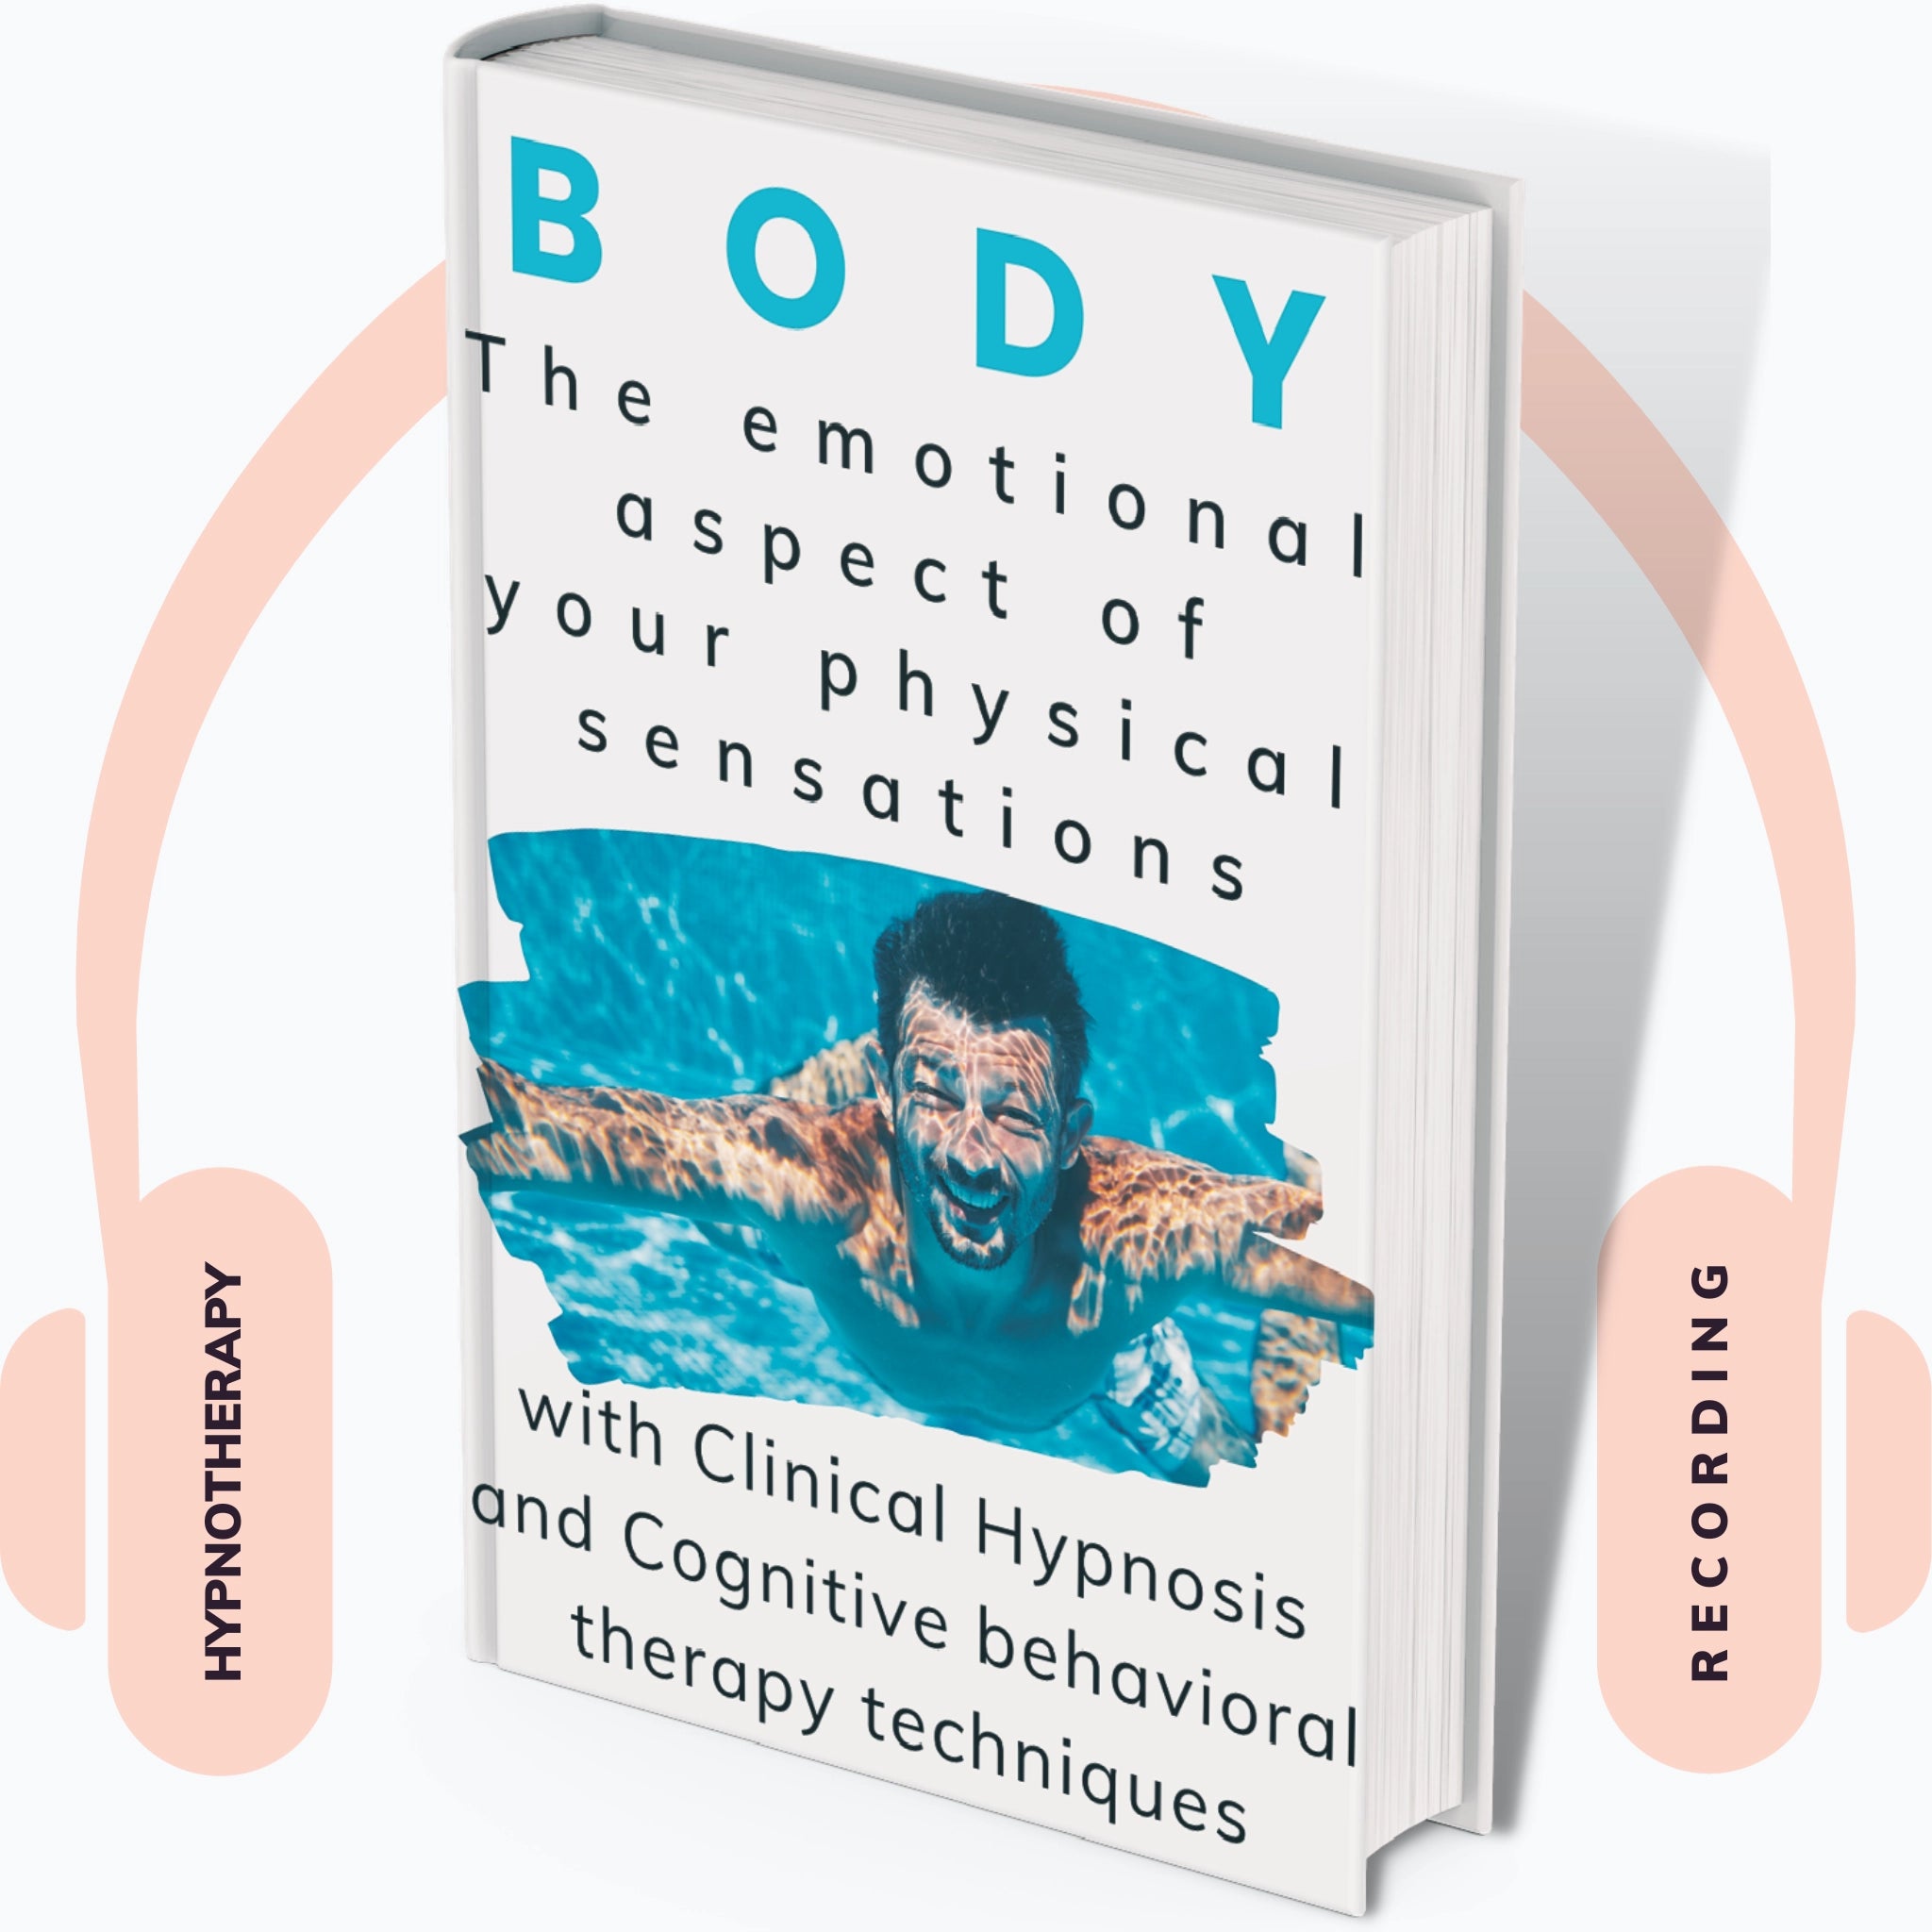 Audiobook cover: In Body, part 1, the emotional aspect of your physical sensations, with Clinical Hypnosis and Cognitive Behavioral Therapy techniques